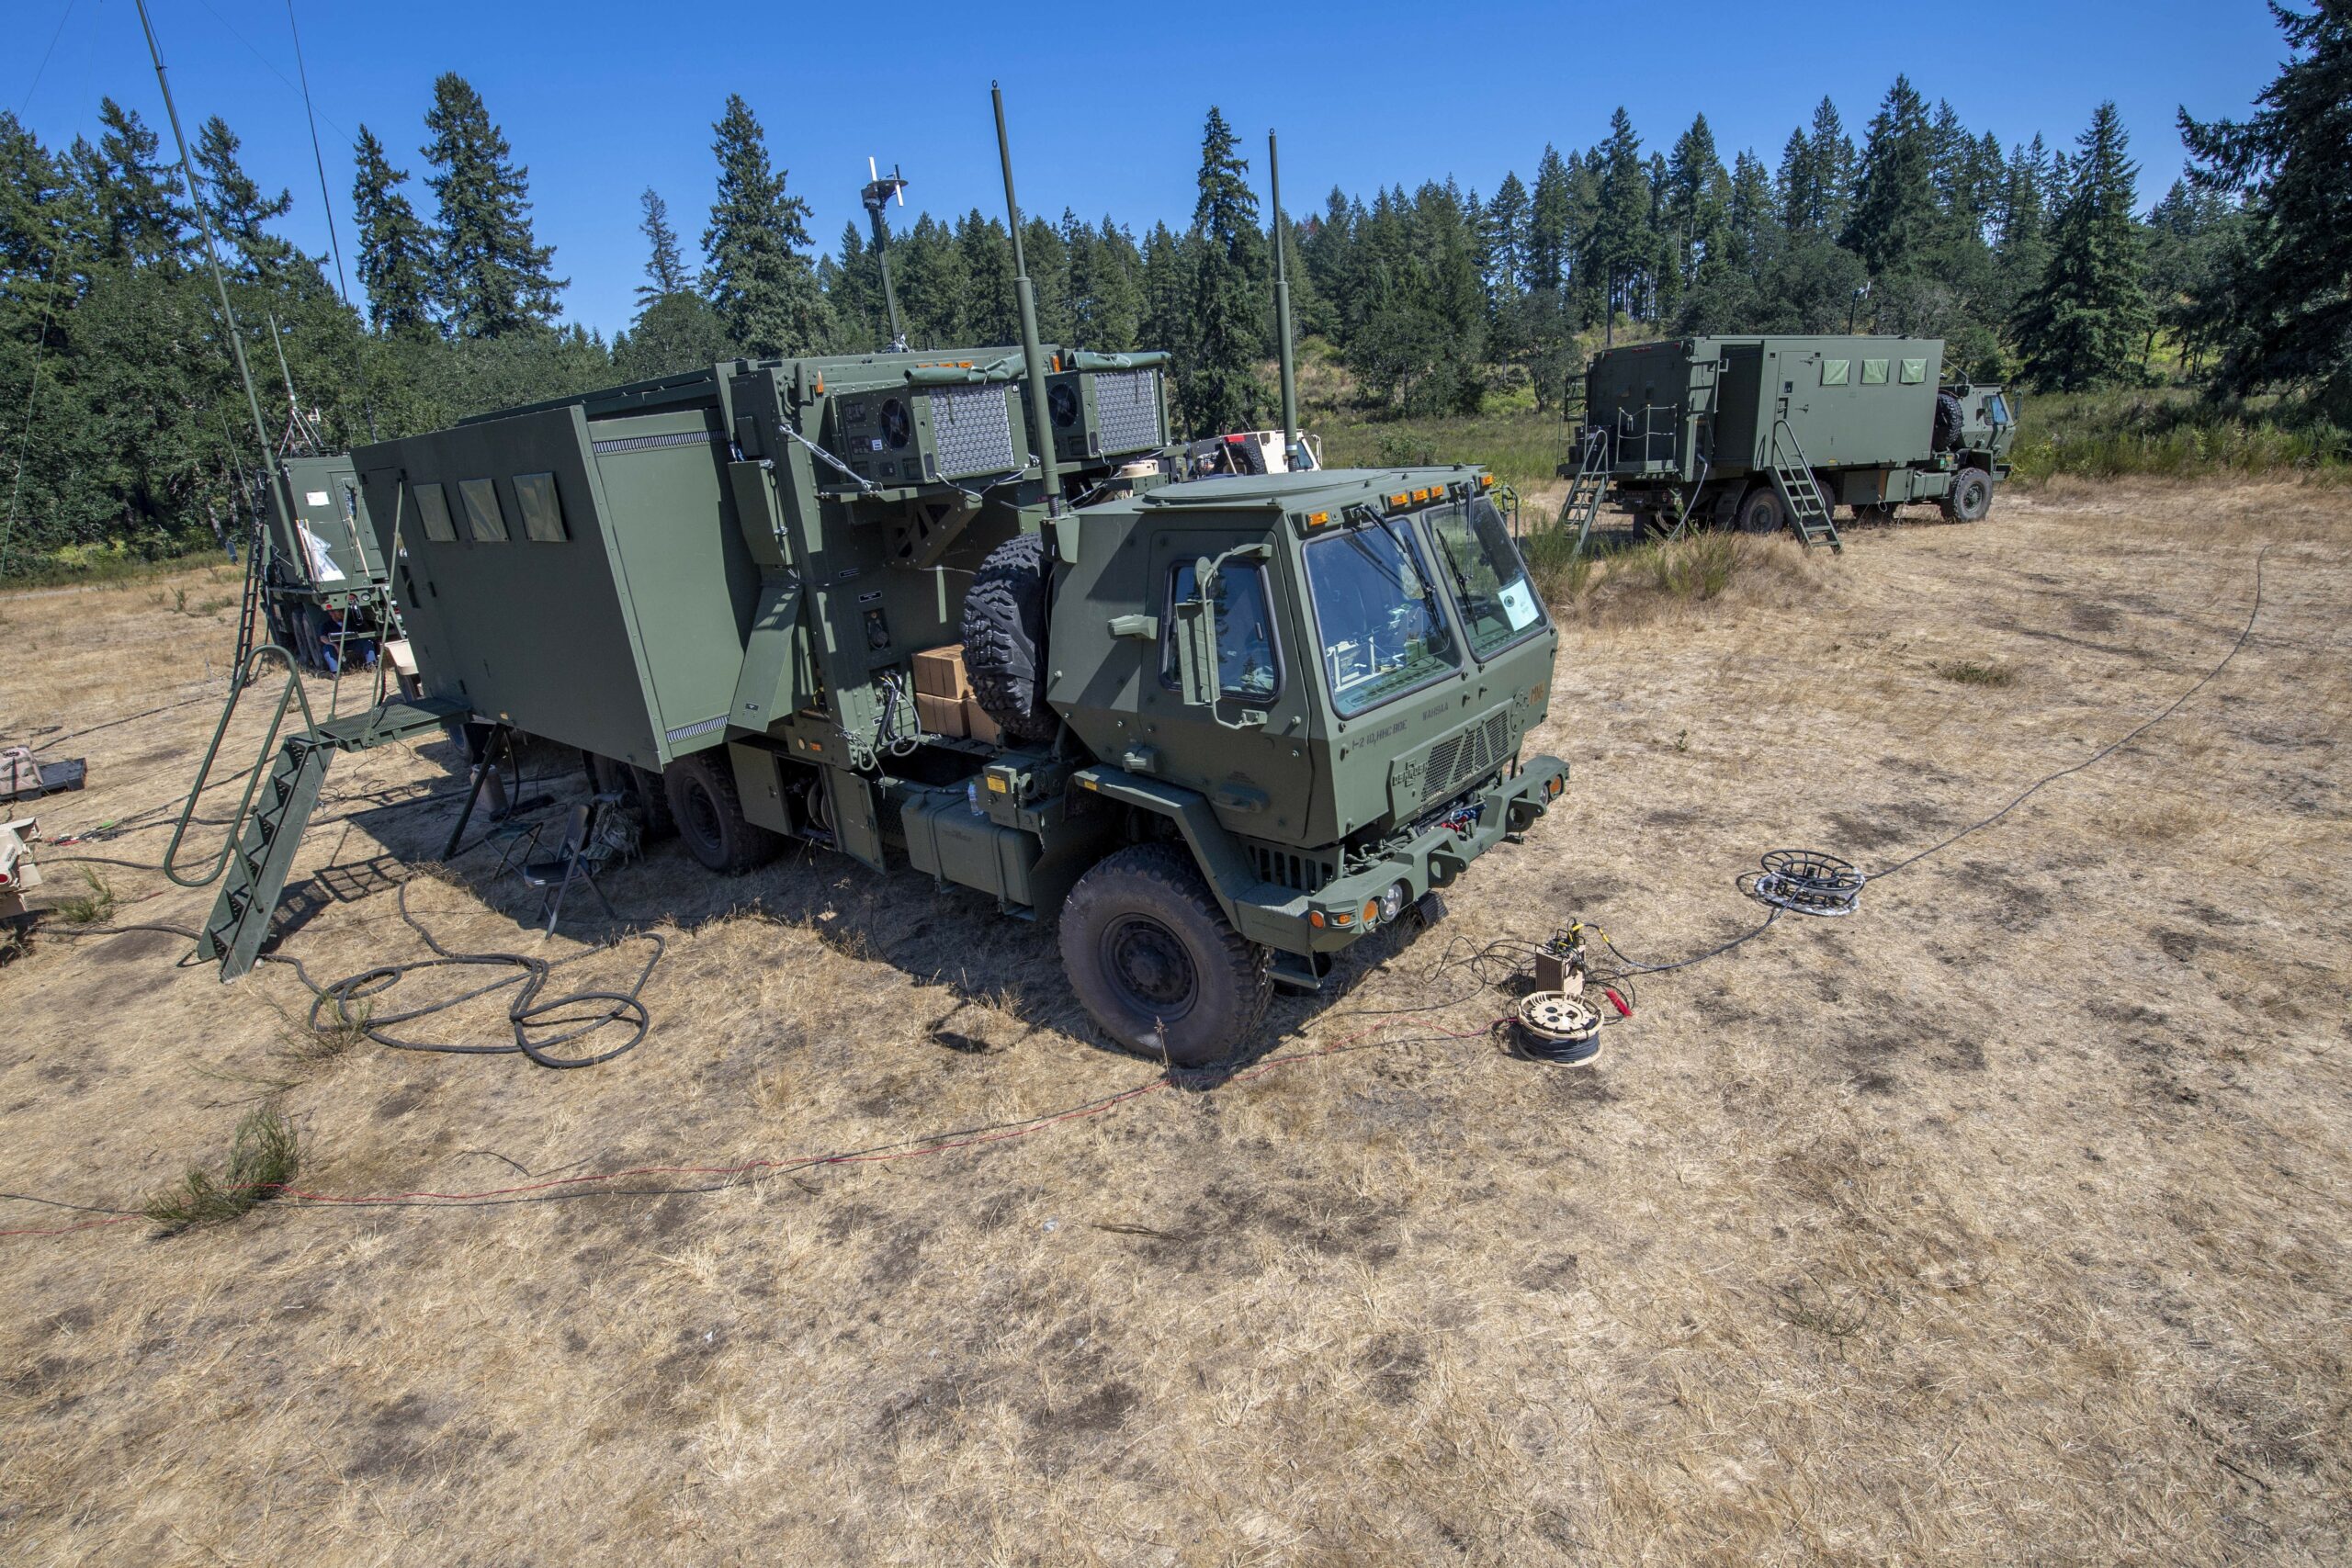 A representative vehicle of the Inc. 0 of the Command Post Integrated Infrastructure (CPI2) is in position at a field location at Joint base Lewis-McChord as communication Soldiers of the 1st Stryker Brigade Combat Team “Ghost,” 2nd Infantry Division participate in operational testing of the system. Data points collected during the test will be used to assess operational effectiveness, suitability, and survivability of CPI2. (U.S. Army photo by Tad Browning)